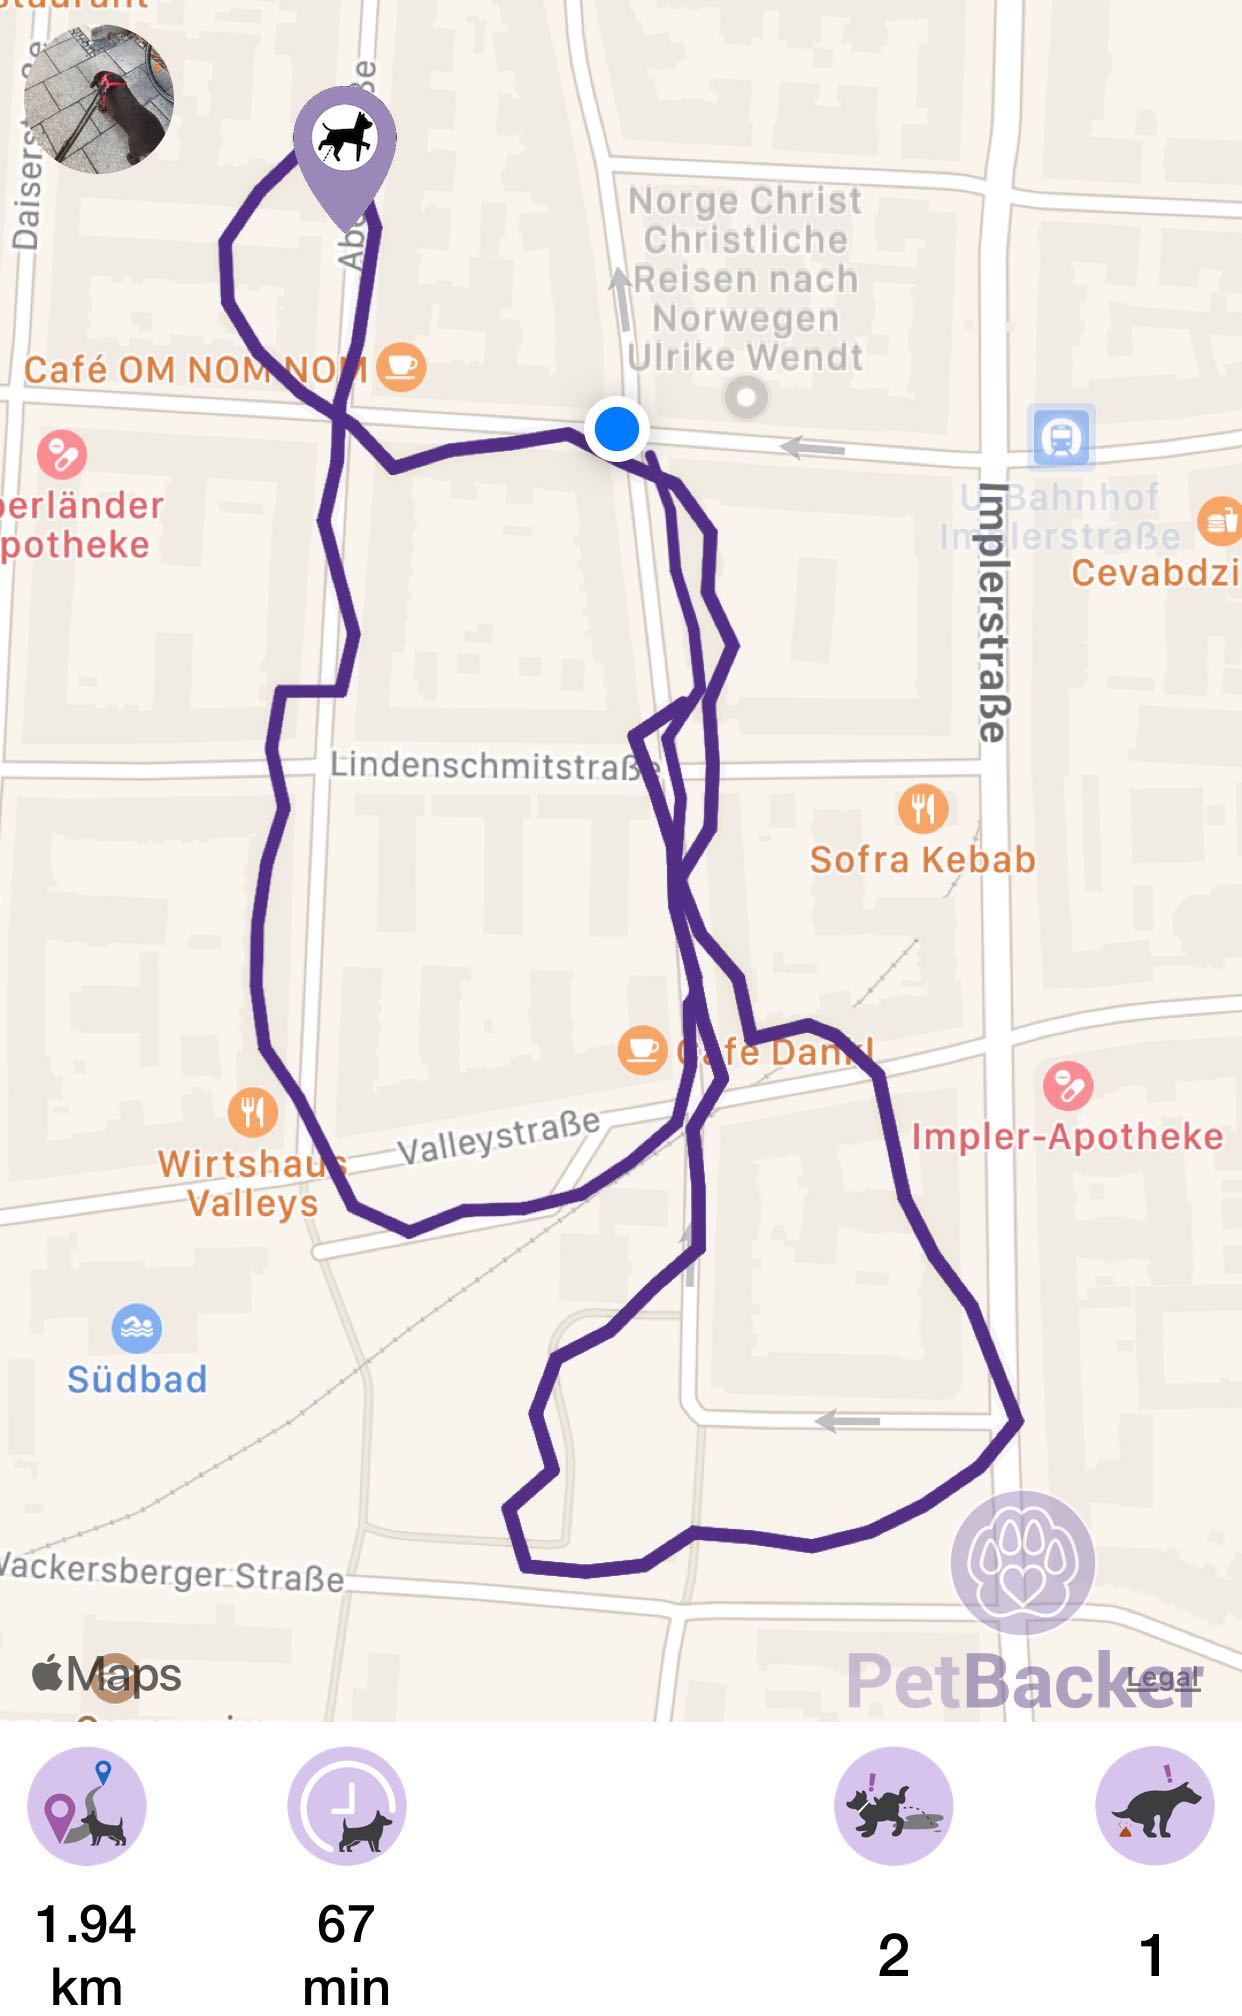 Just completed pet walking of 1.94 km